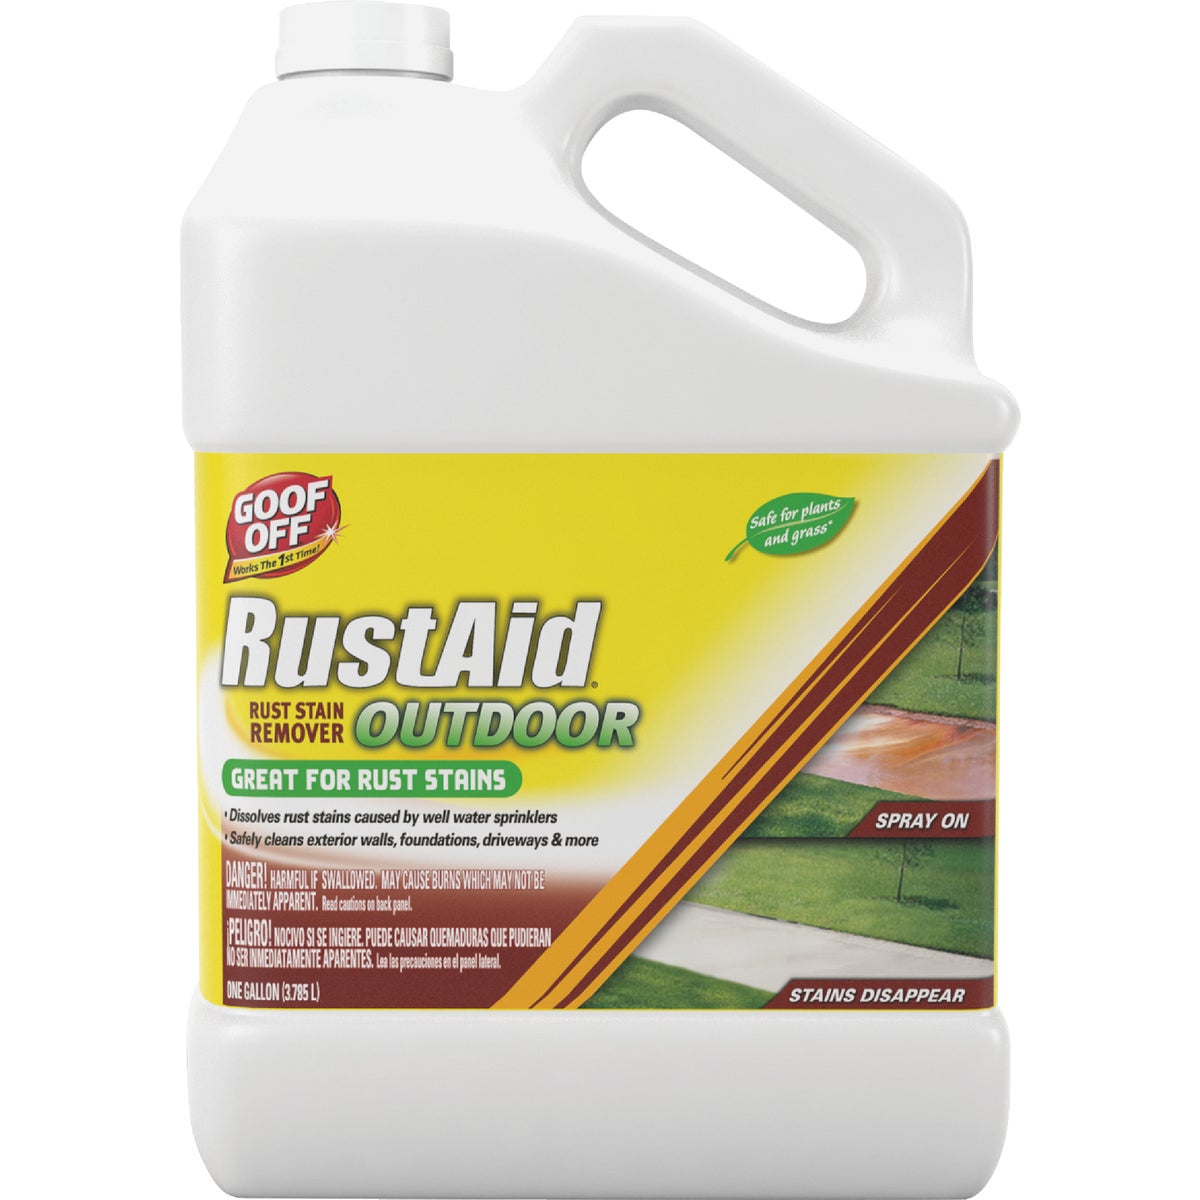 Goof Off 1 Gal. Outdoor Rust Stain Remover